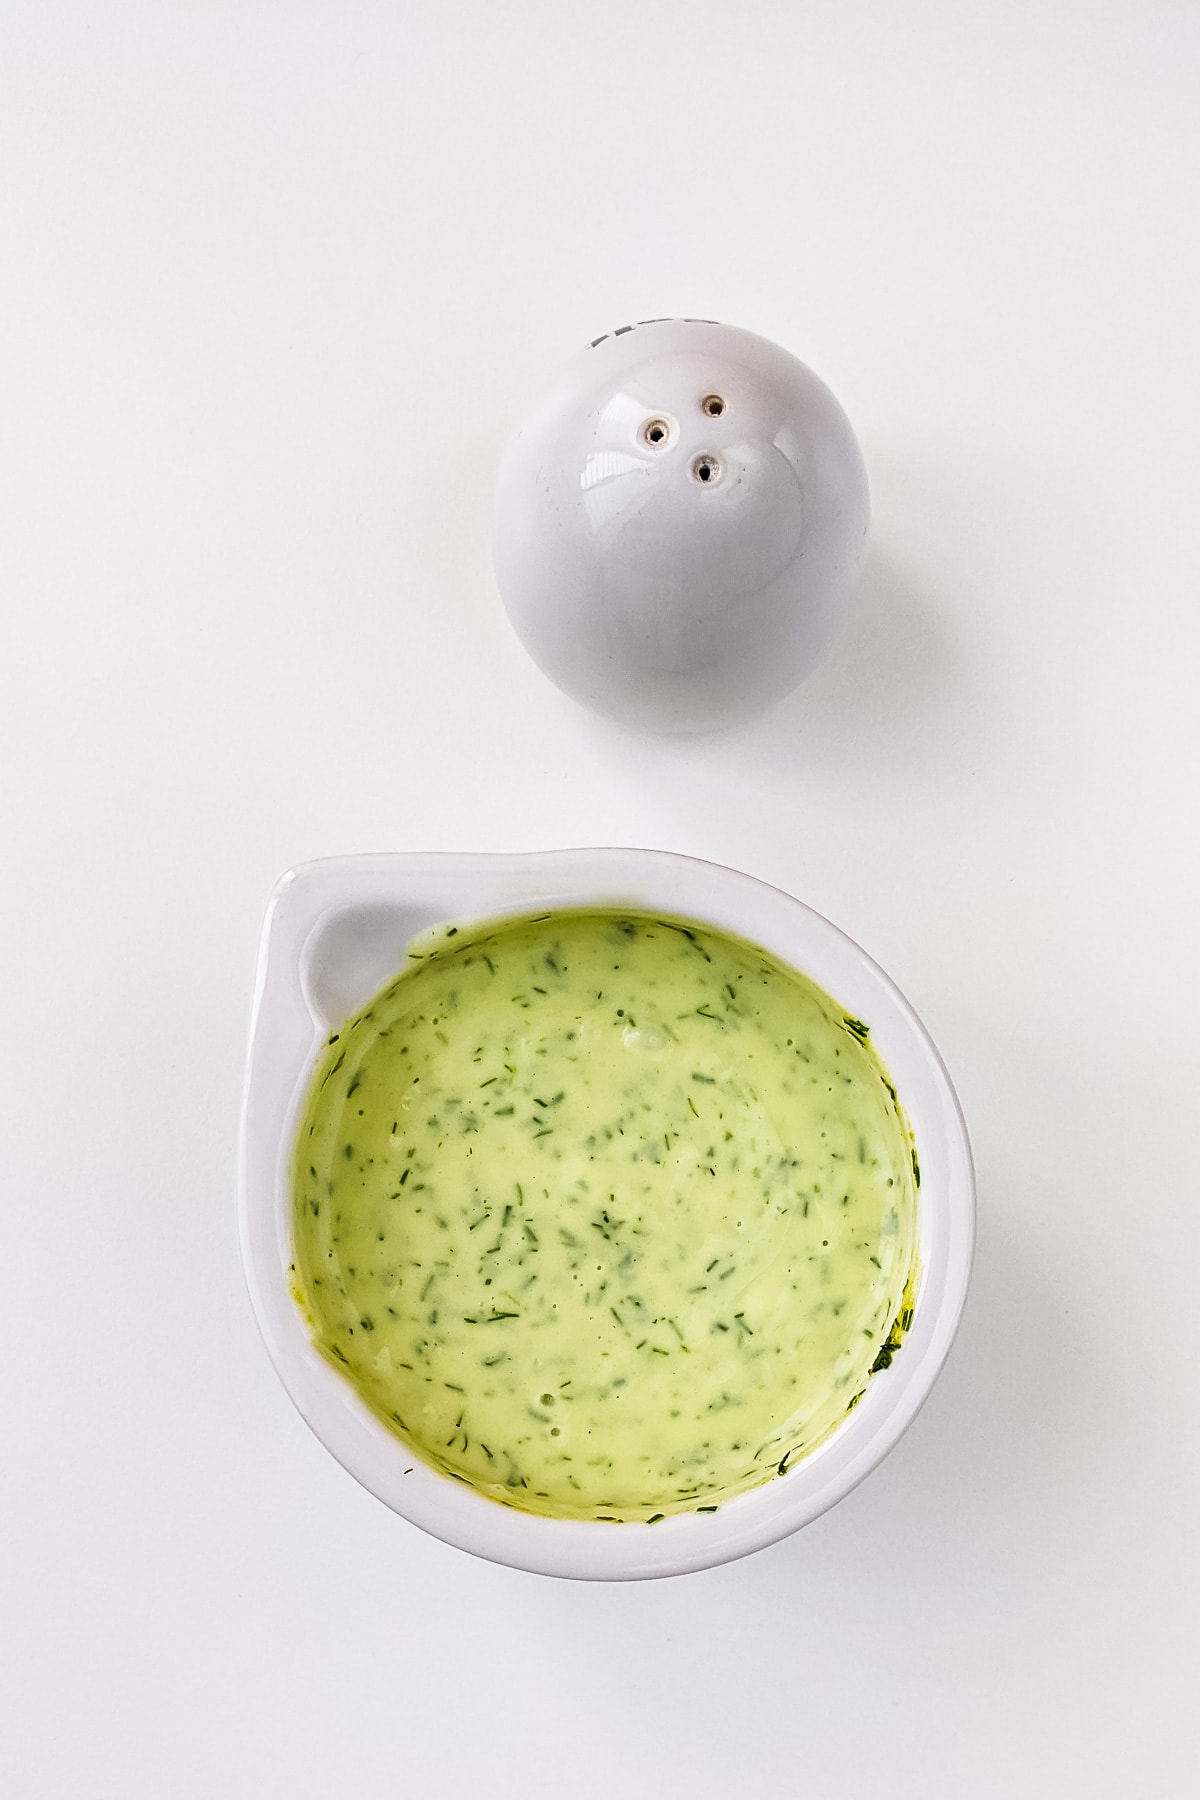 Top view of mixed honey dill sauce on a white table.